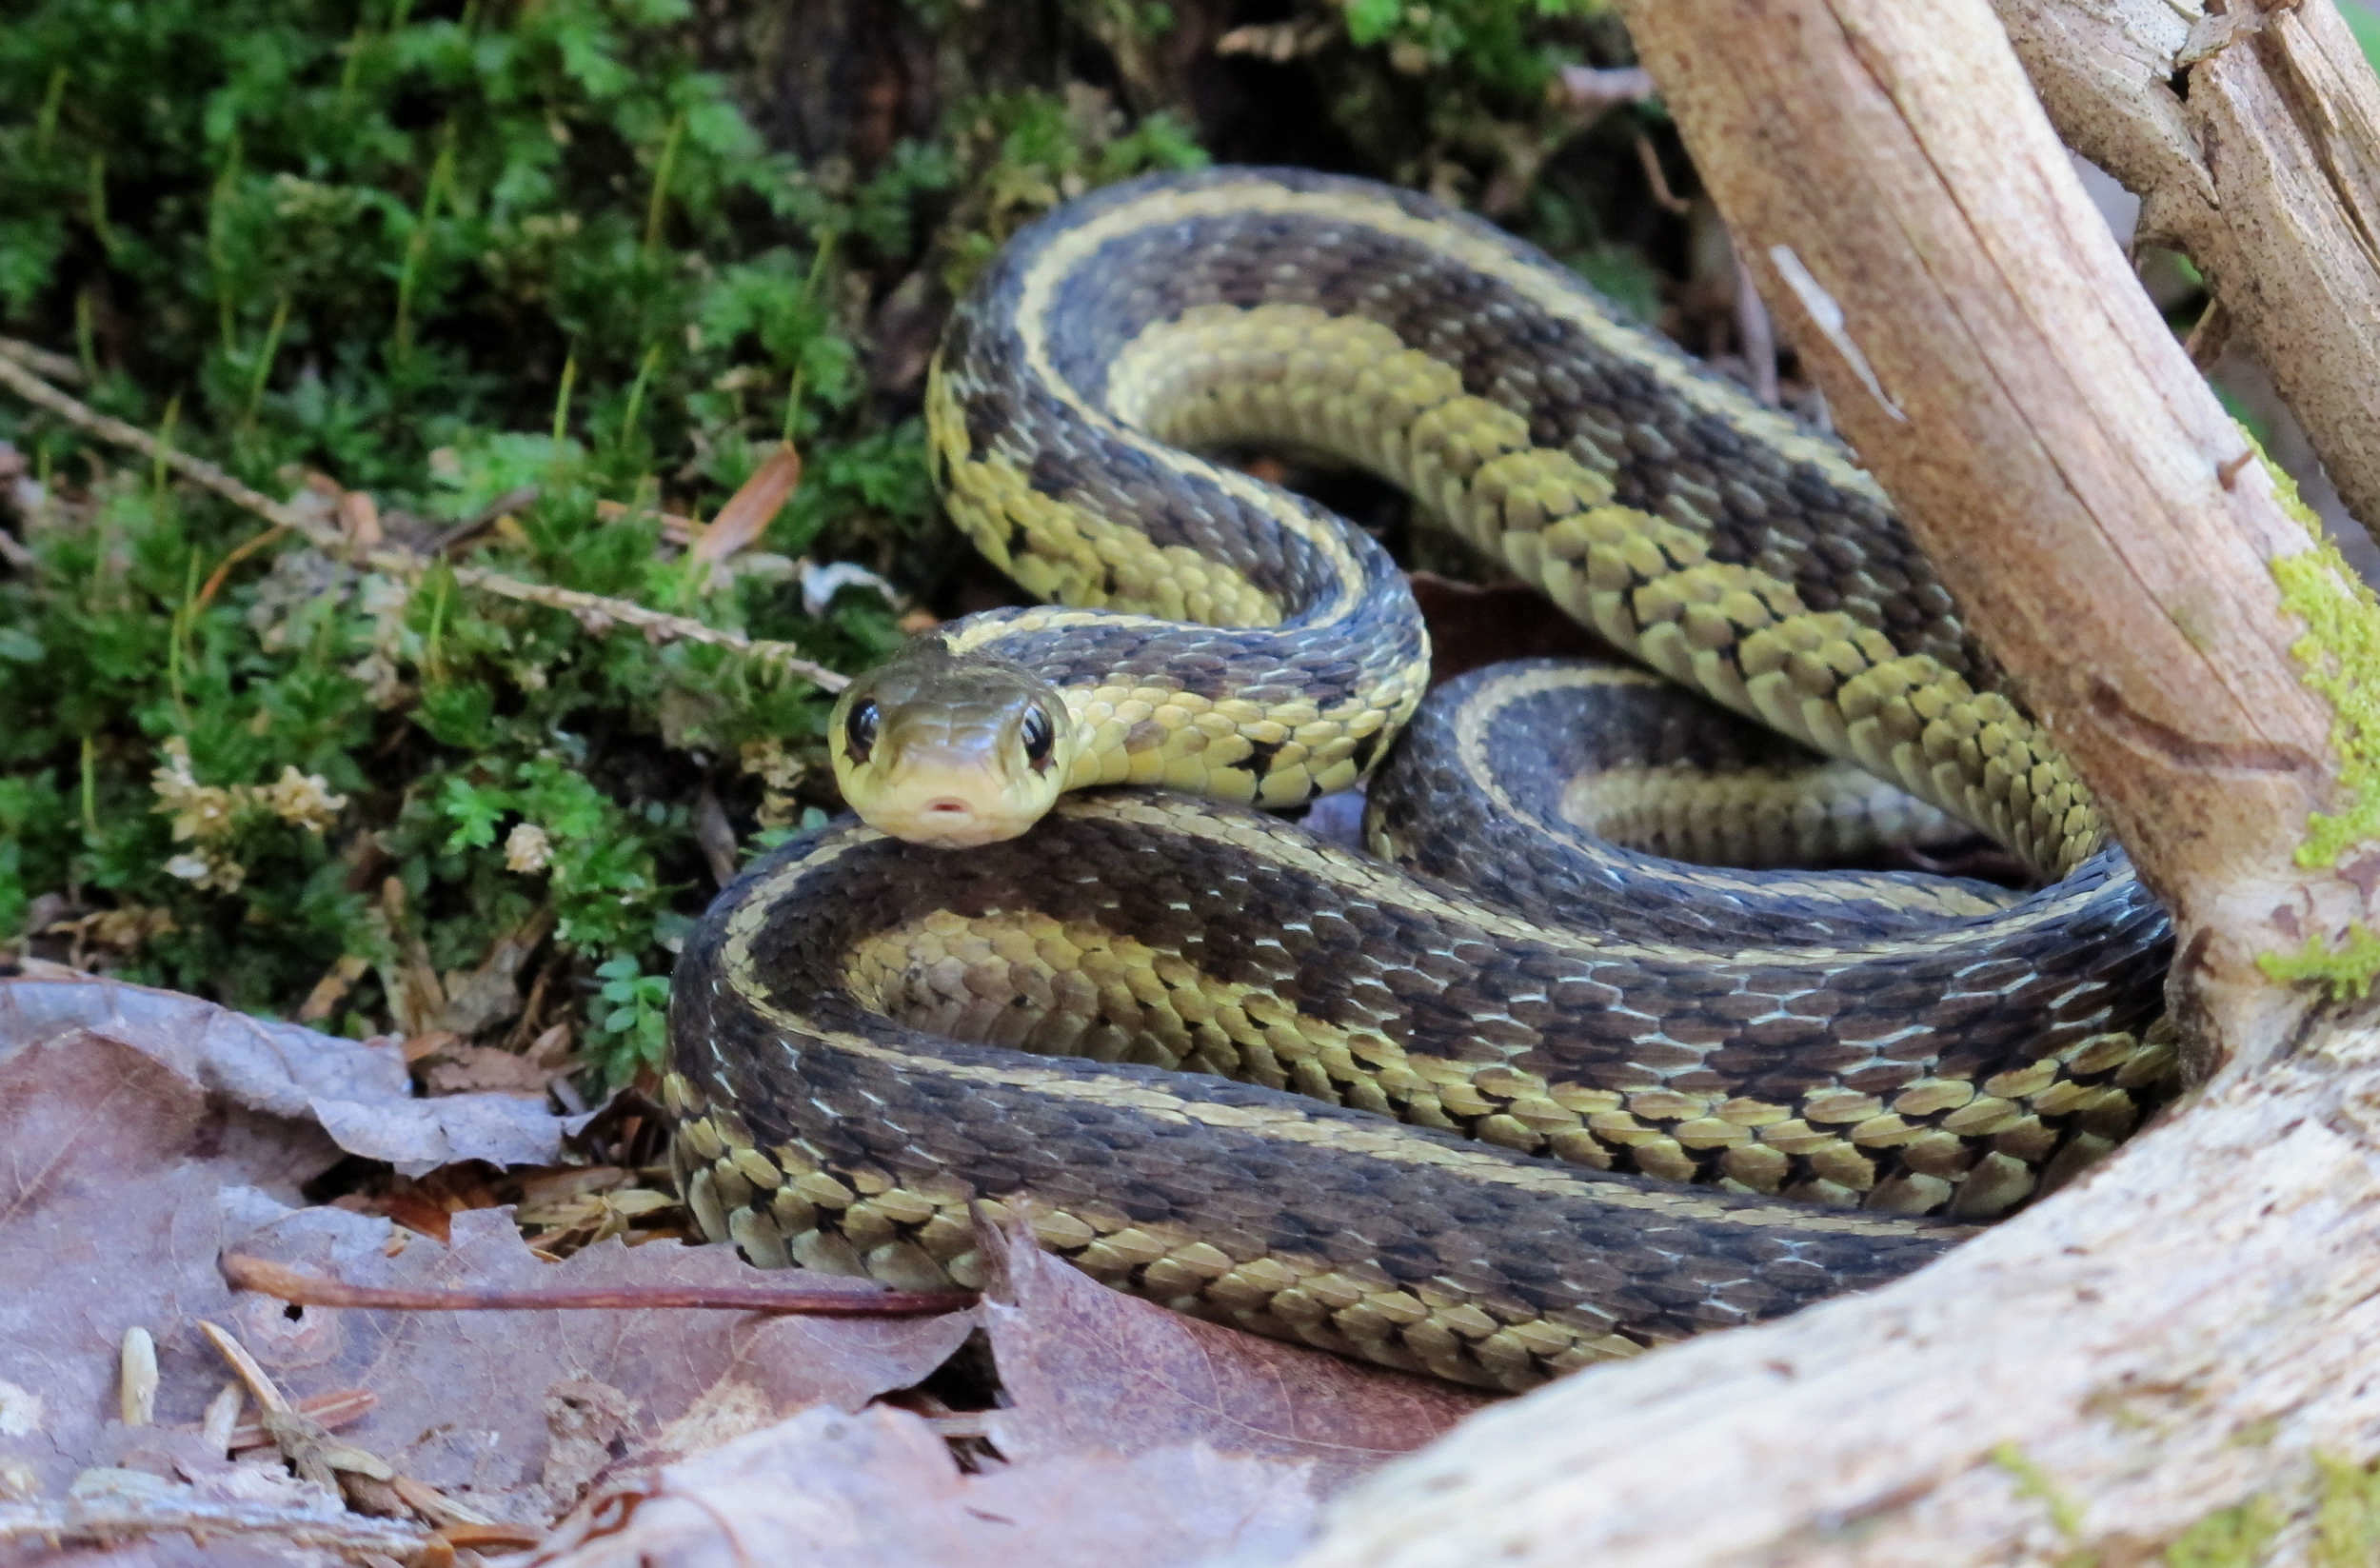 A garter snake curled up near a branch on the ground. (photo © Brett Amy Thelen)